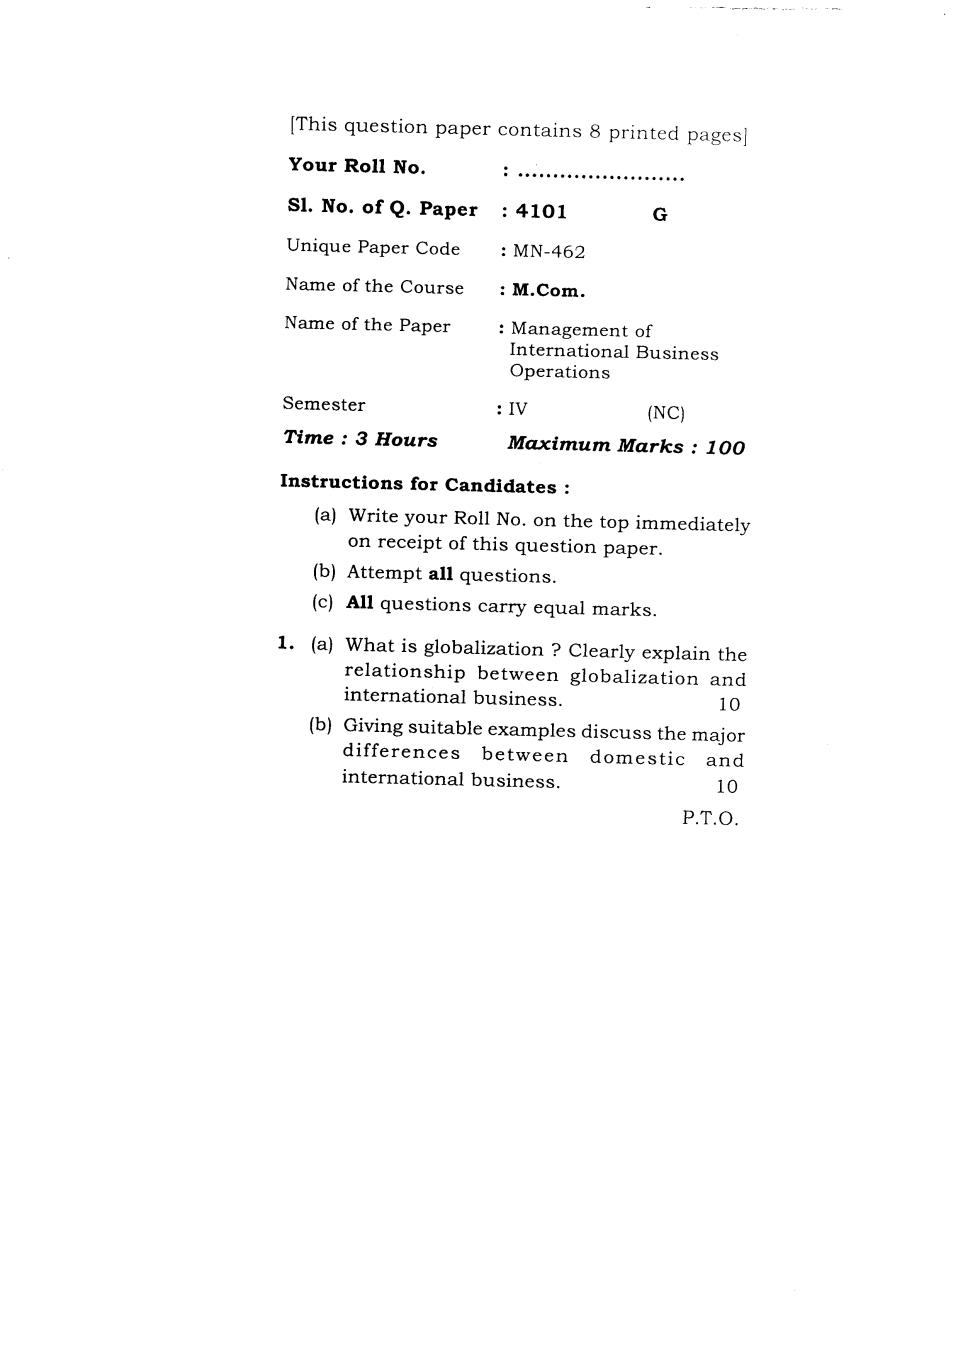 DU SOL M.Com Question Paper 2nd Year 2018 Sem 4 Management Of International Business Operations - Page 1